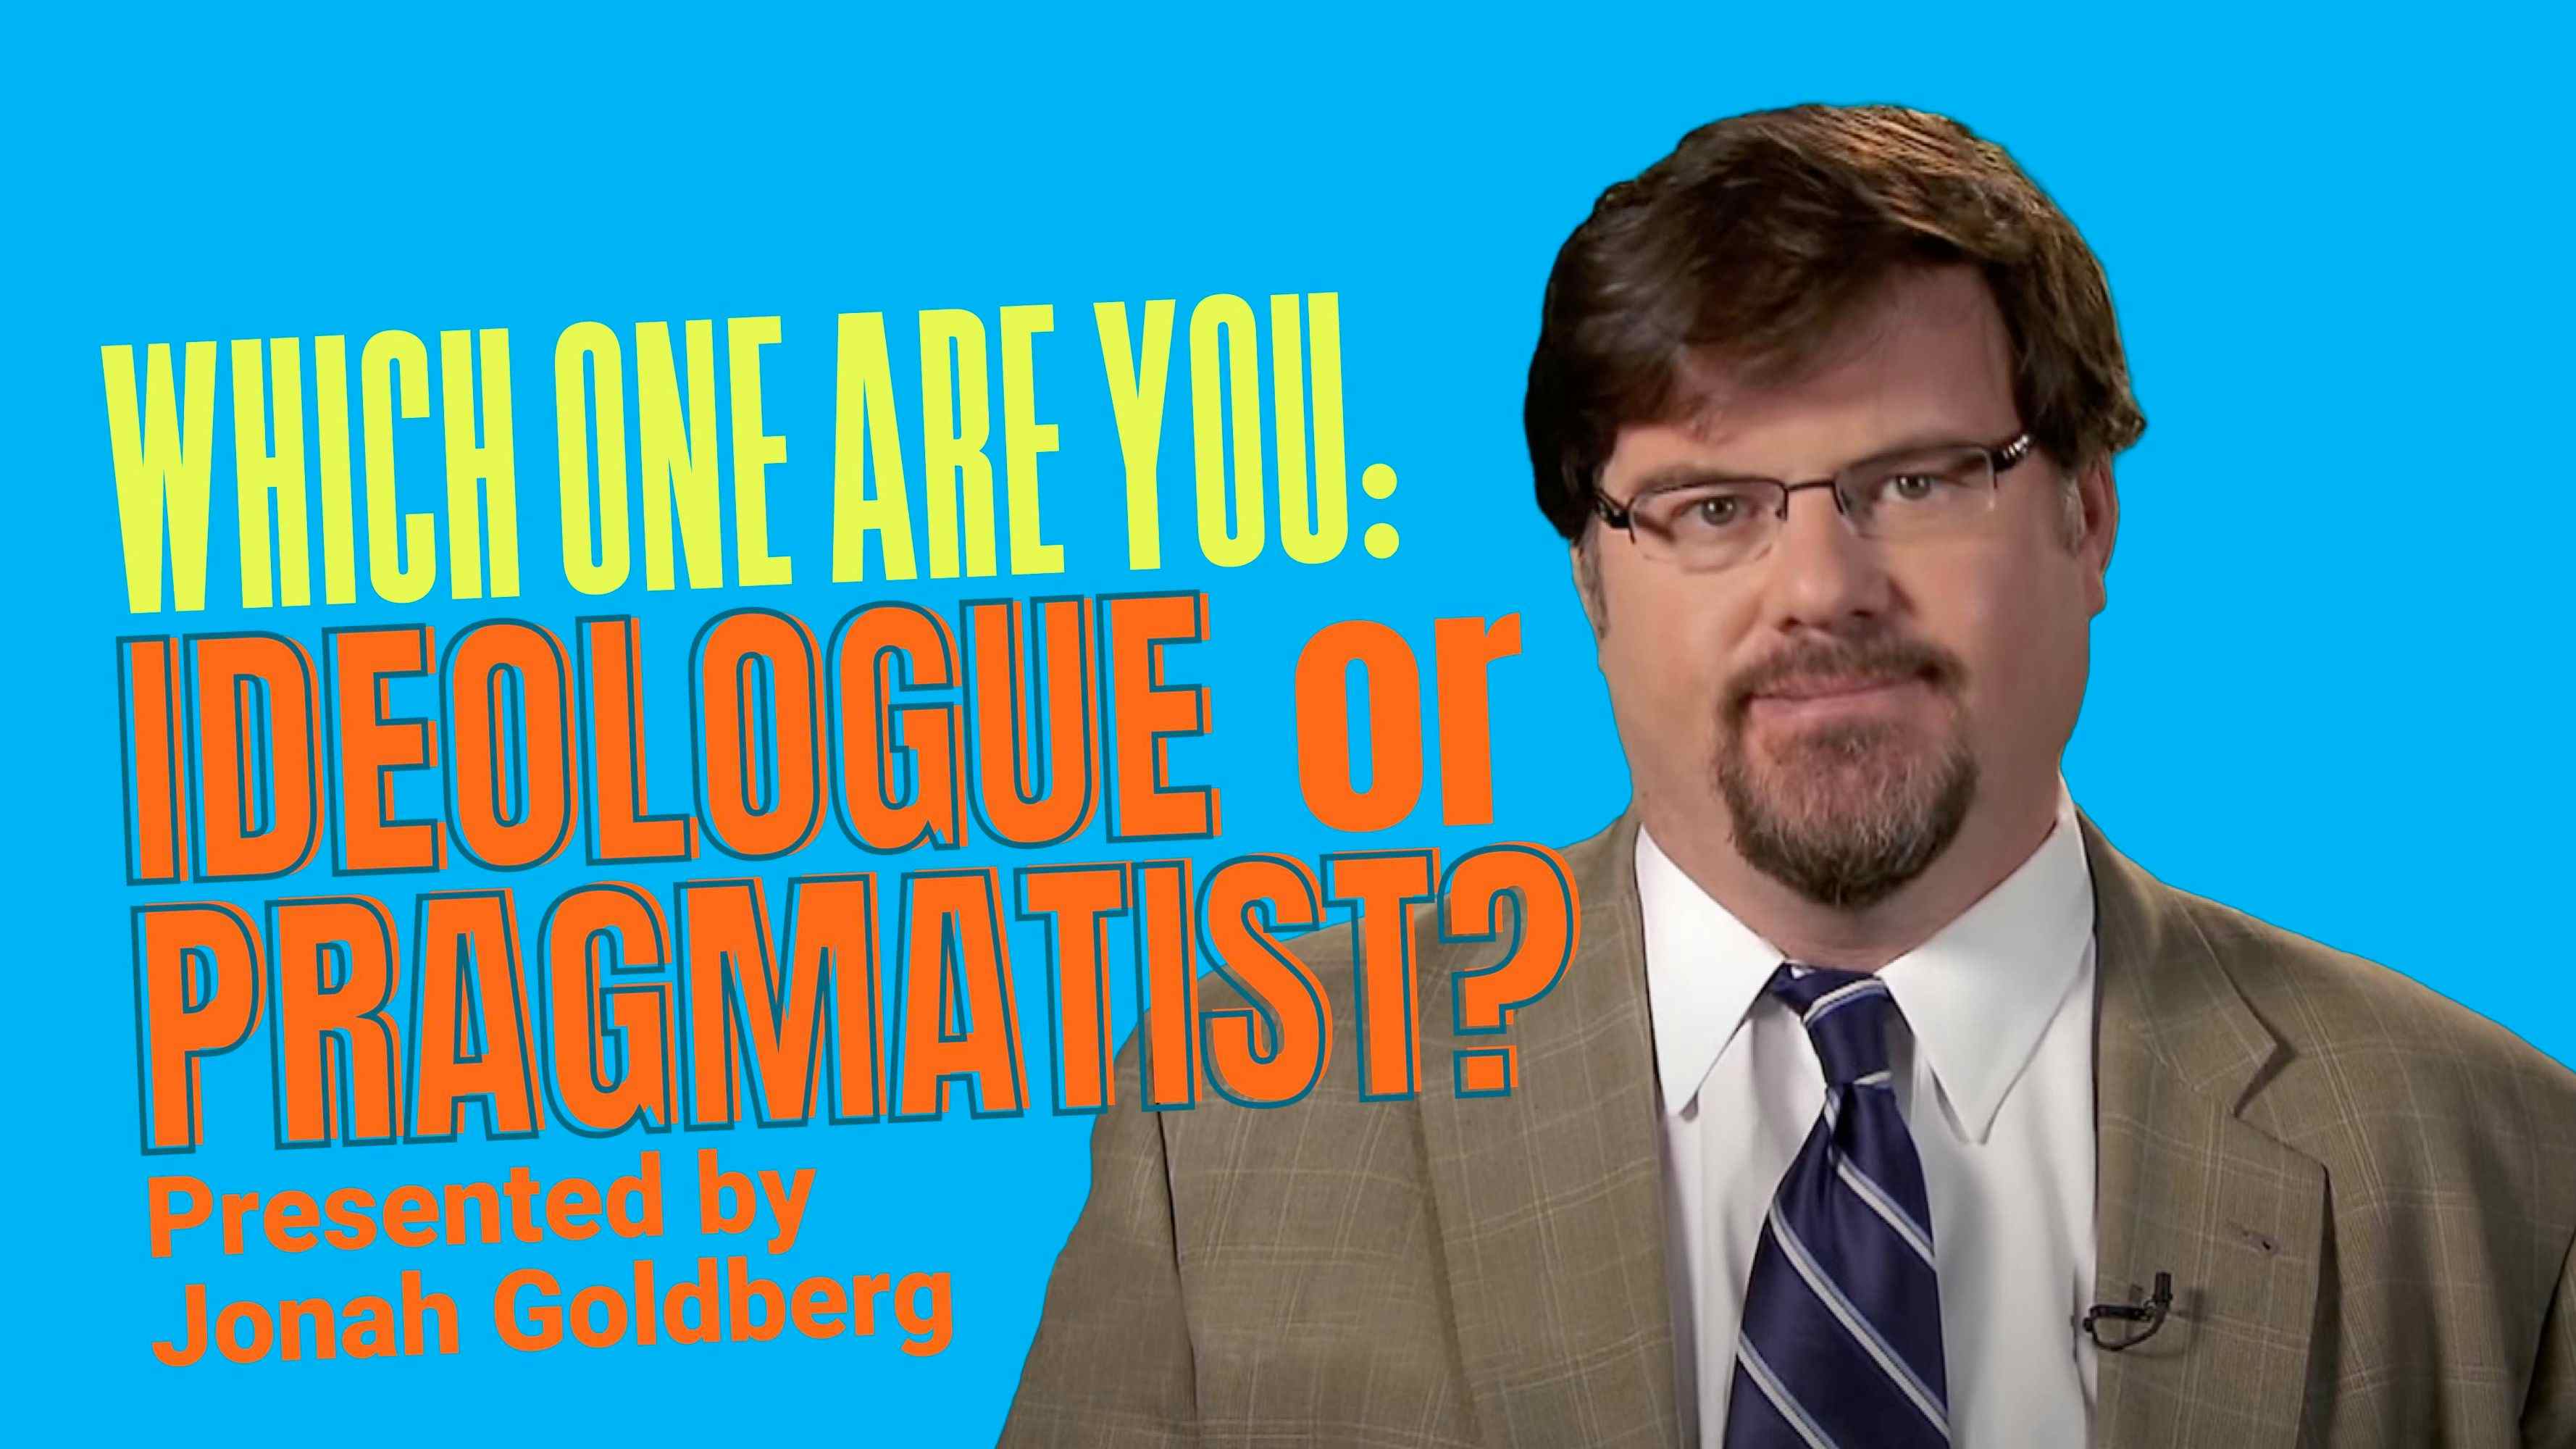 Which One Are You: Ideologue or Pragmatist?